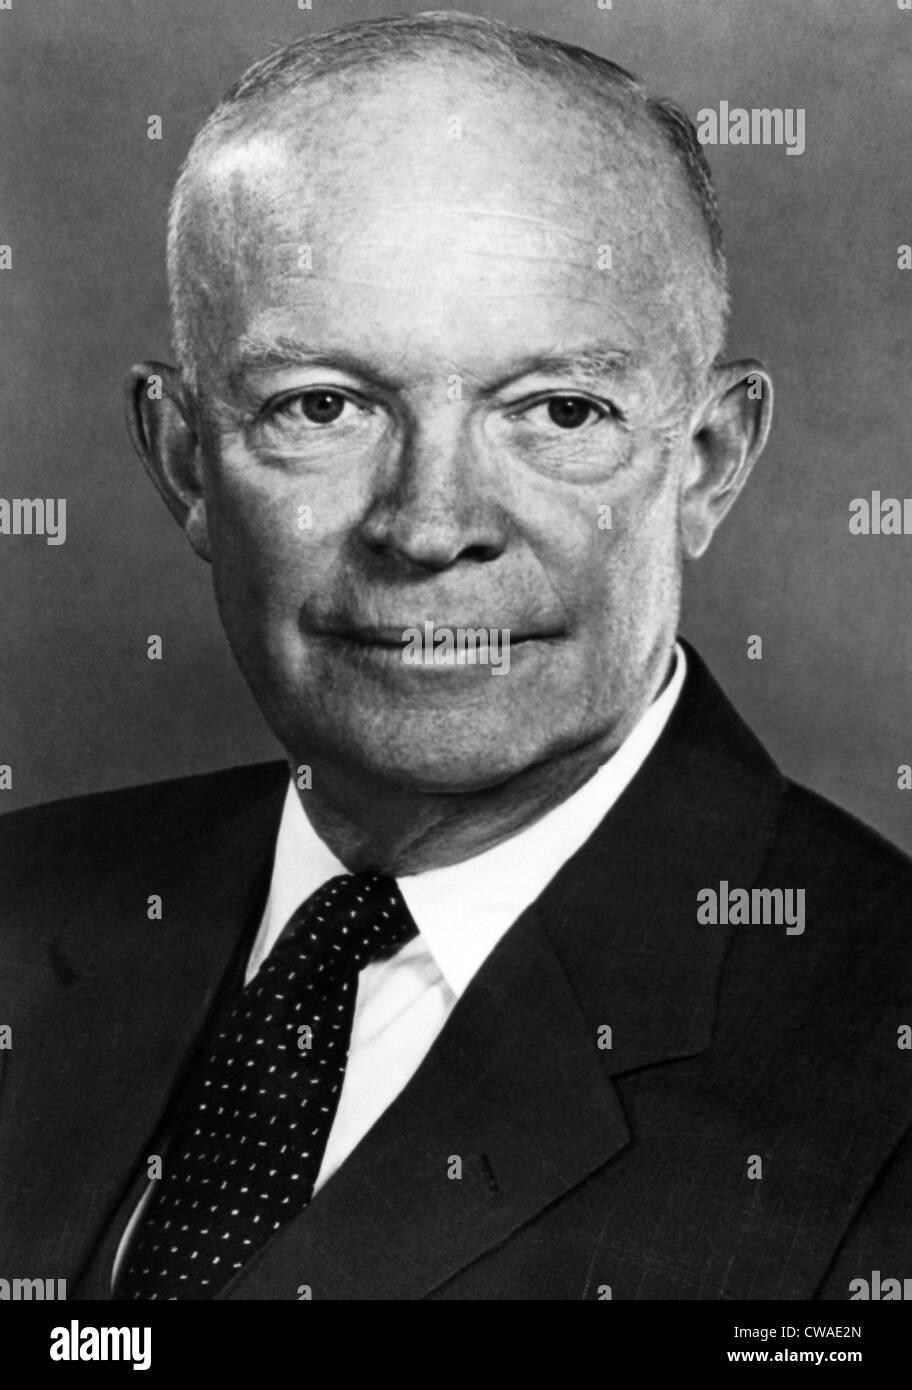 A portrait of President Dwight D. Eisenhower. Courtesy CSU Archives/Everett Collection. Stock Photo